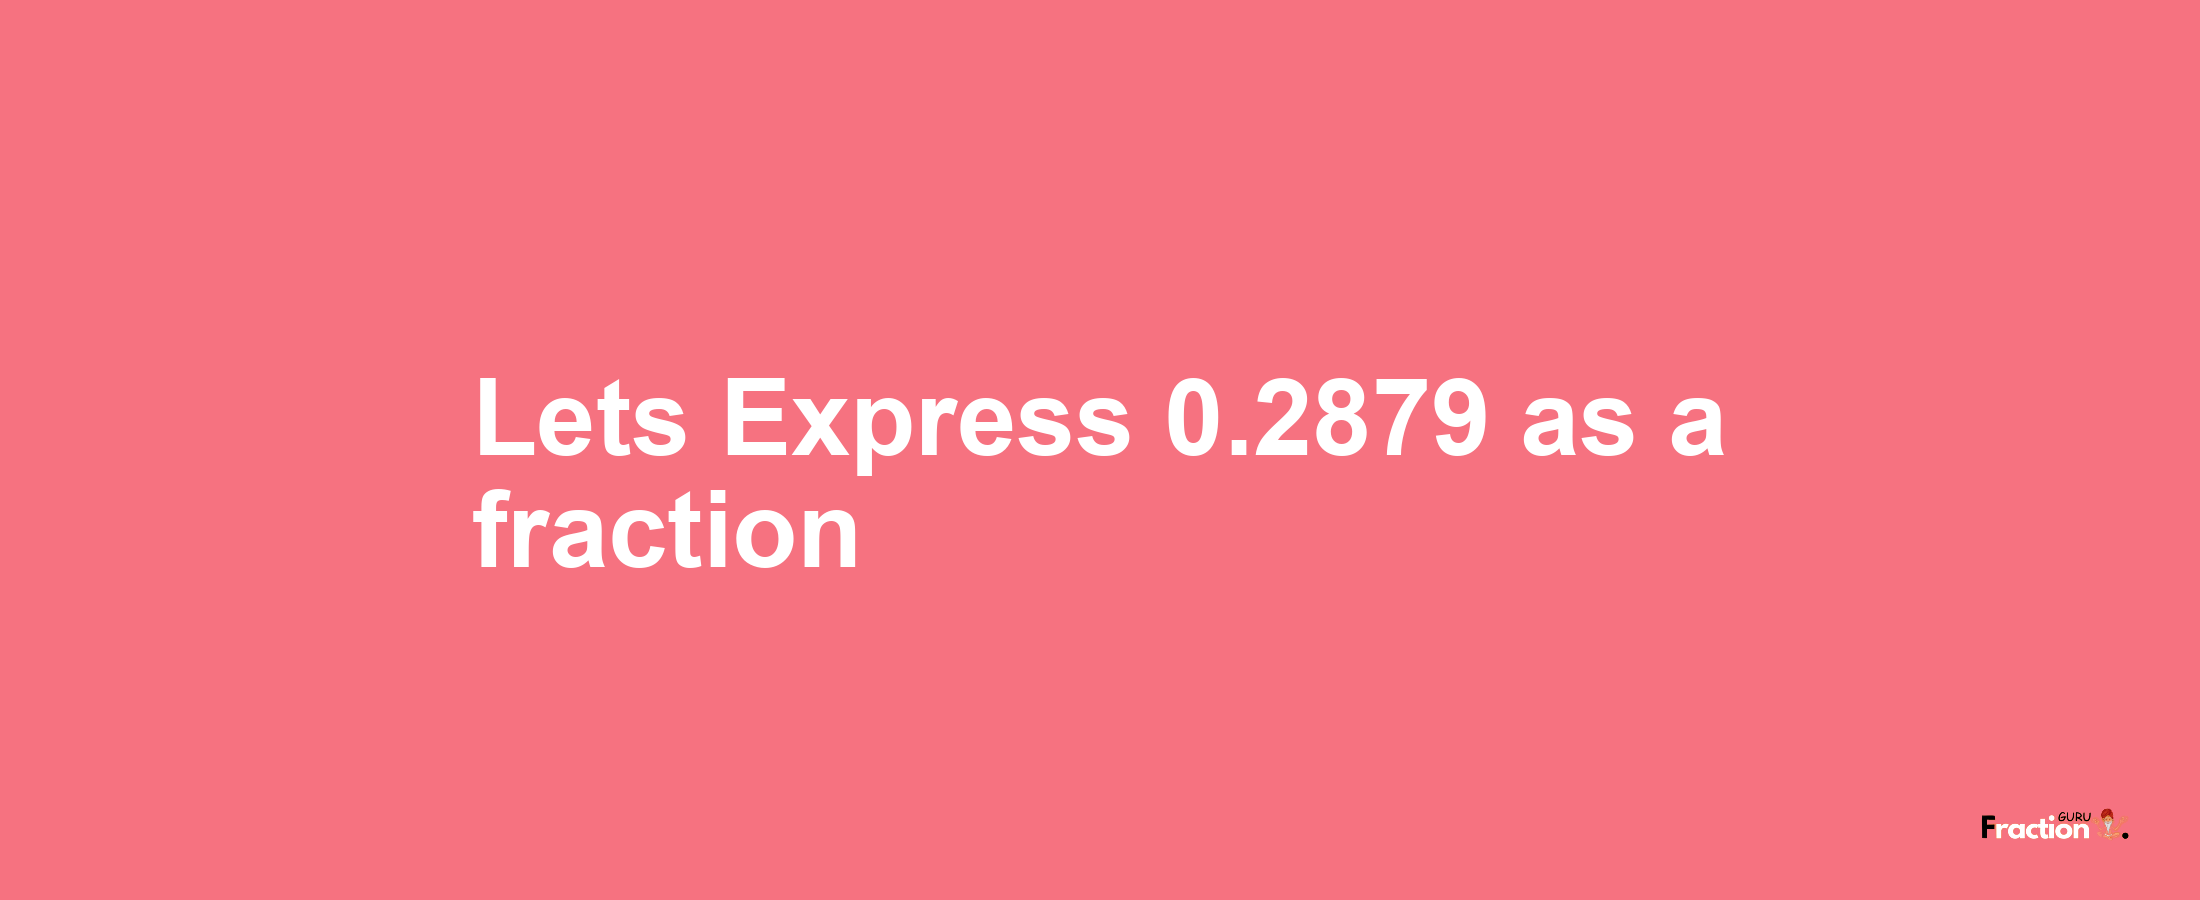 Lets Express 0.2879 as afraction